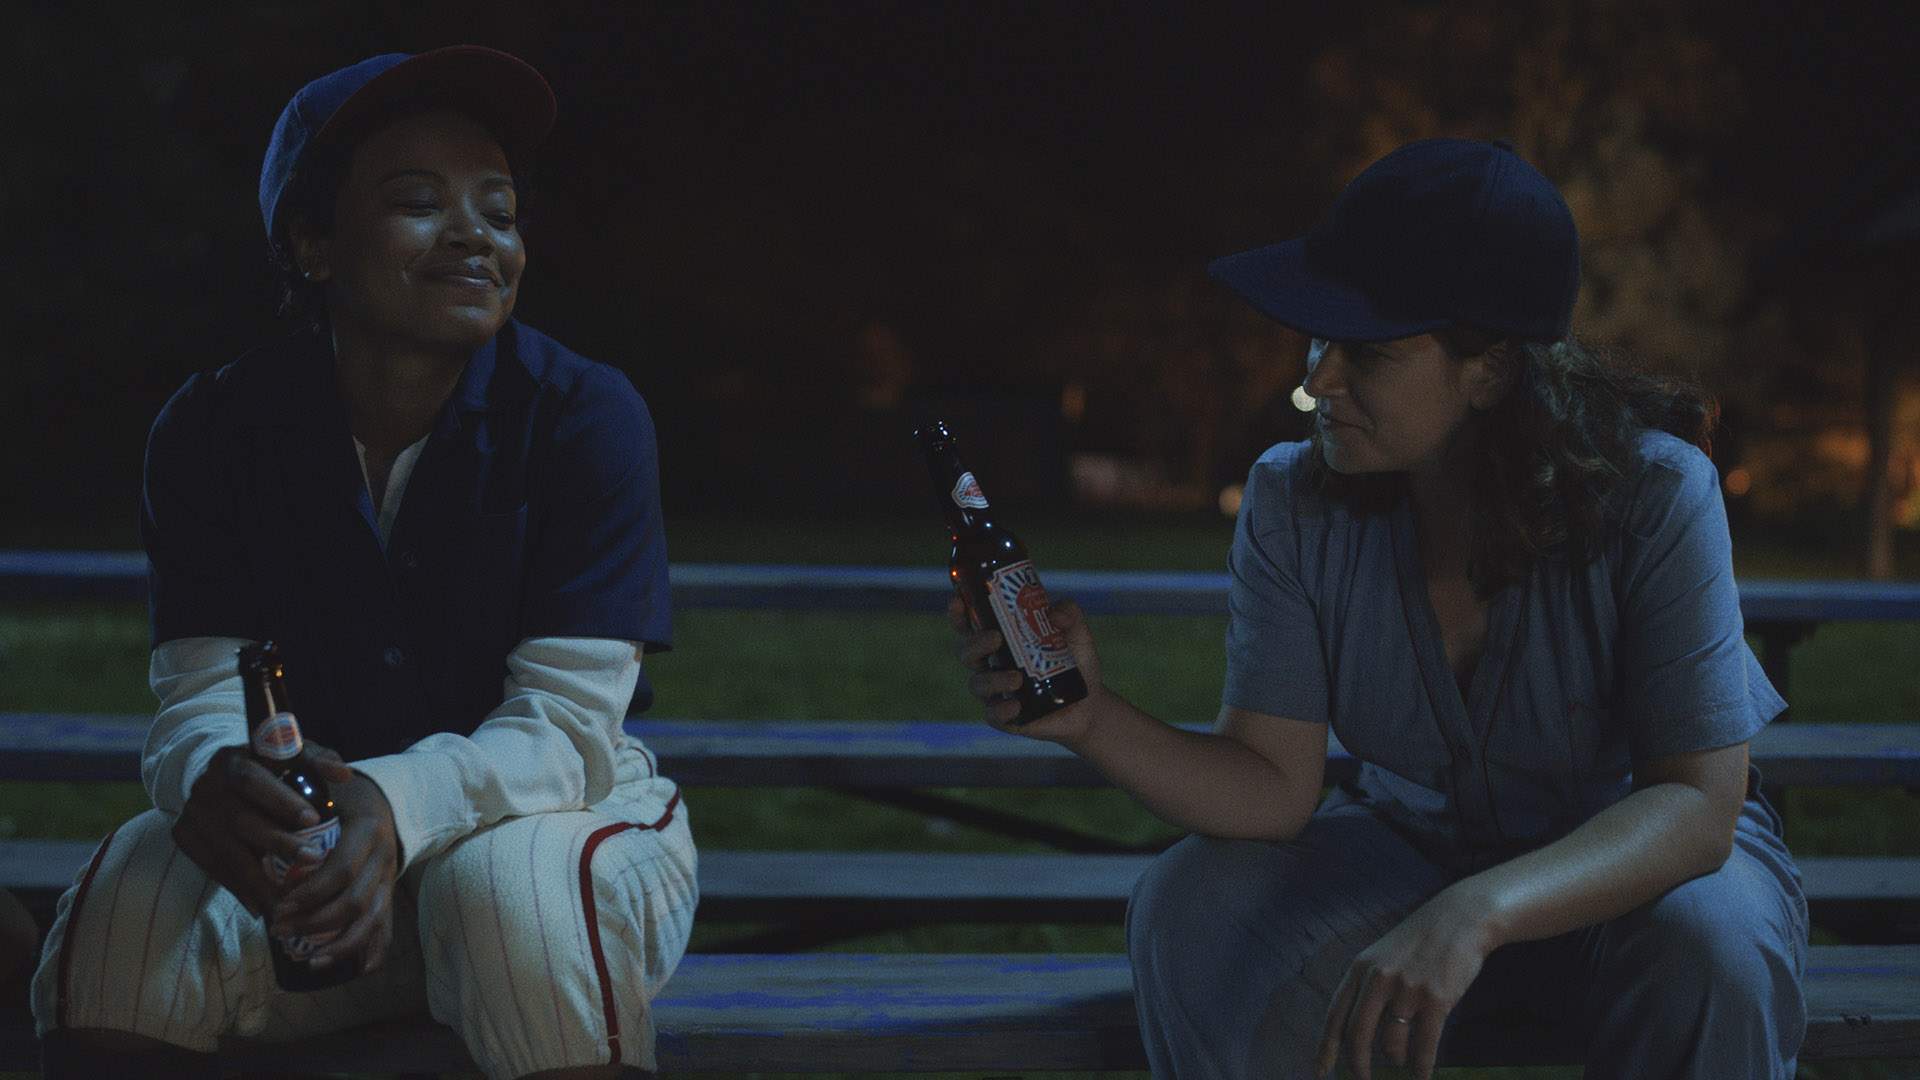 The Must-See New 'A League of Their Own' Series Gives the Beloved 90s Movie a Worthy Extra Innings